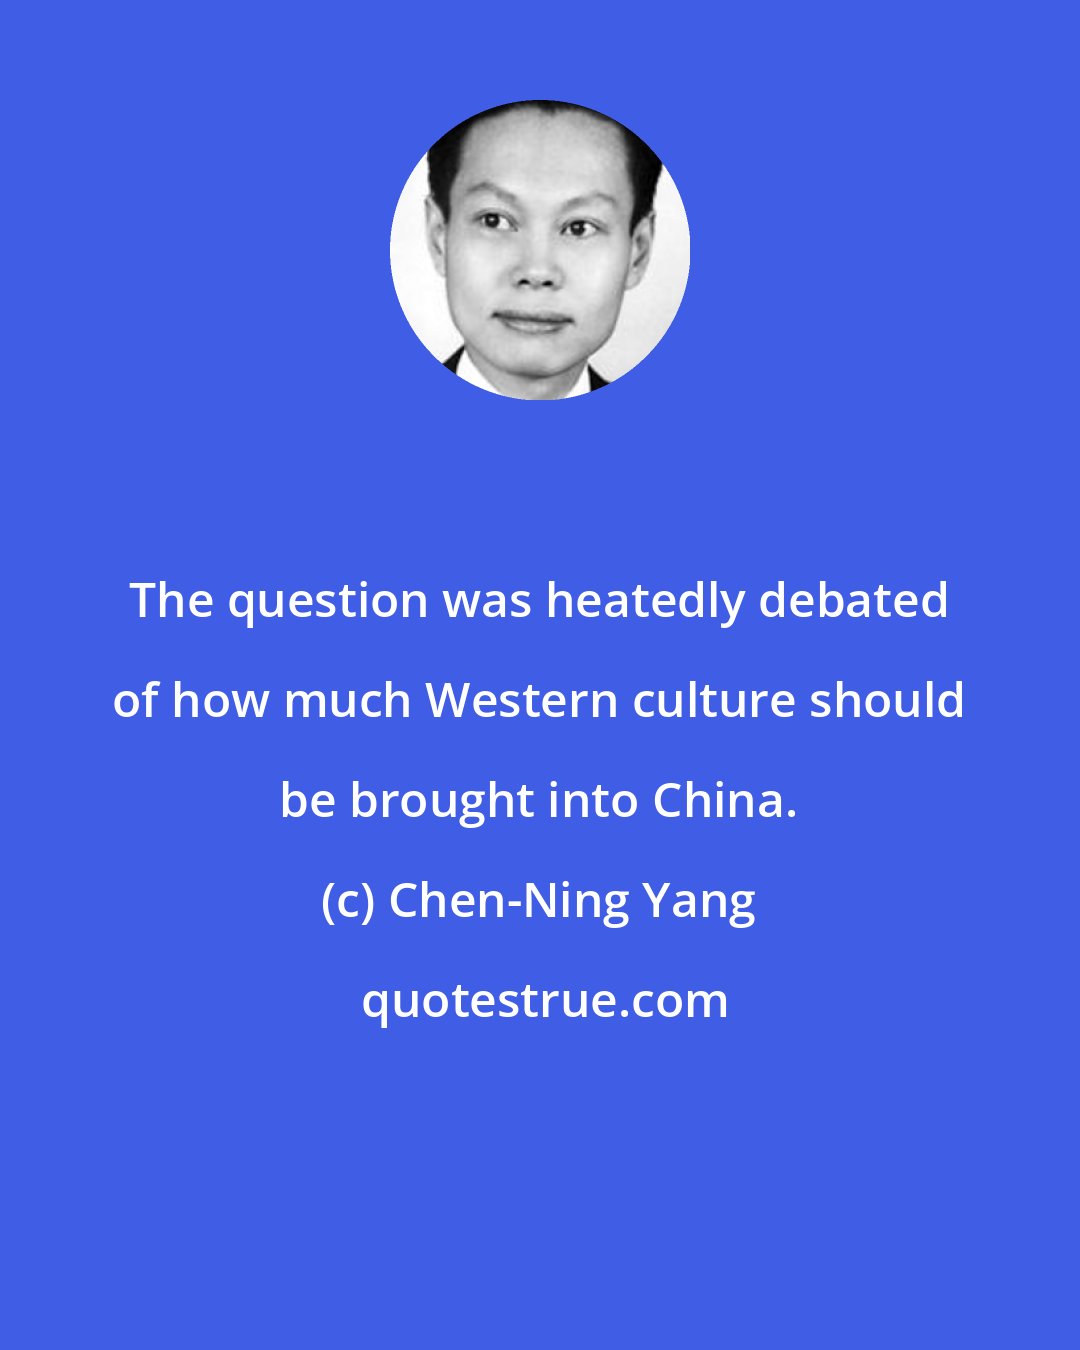 Chen-Ning Yang: The question was heatedly debated of how much Western culture should be brought into China.